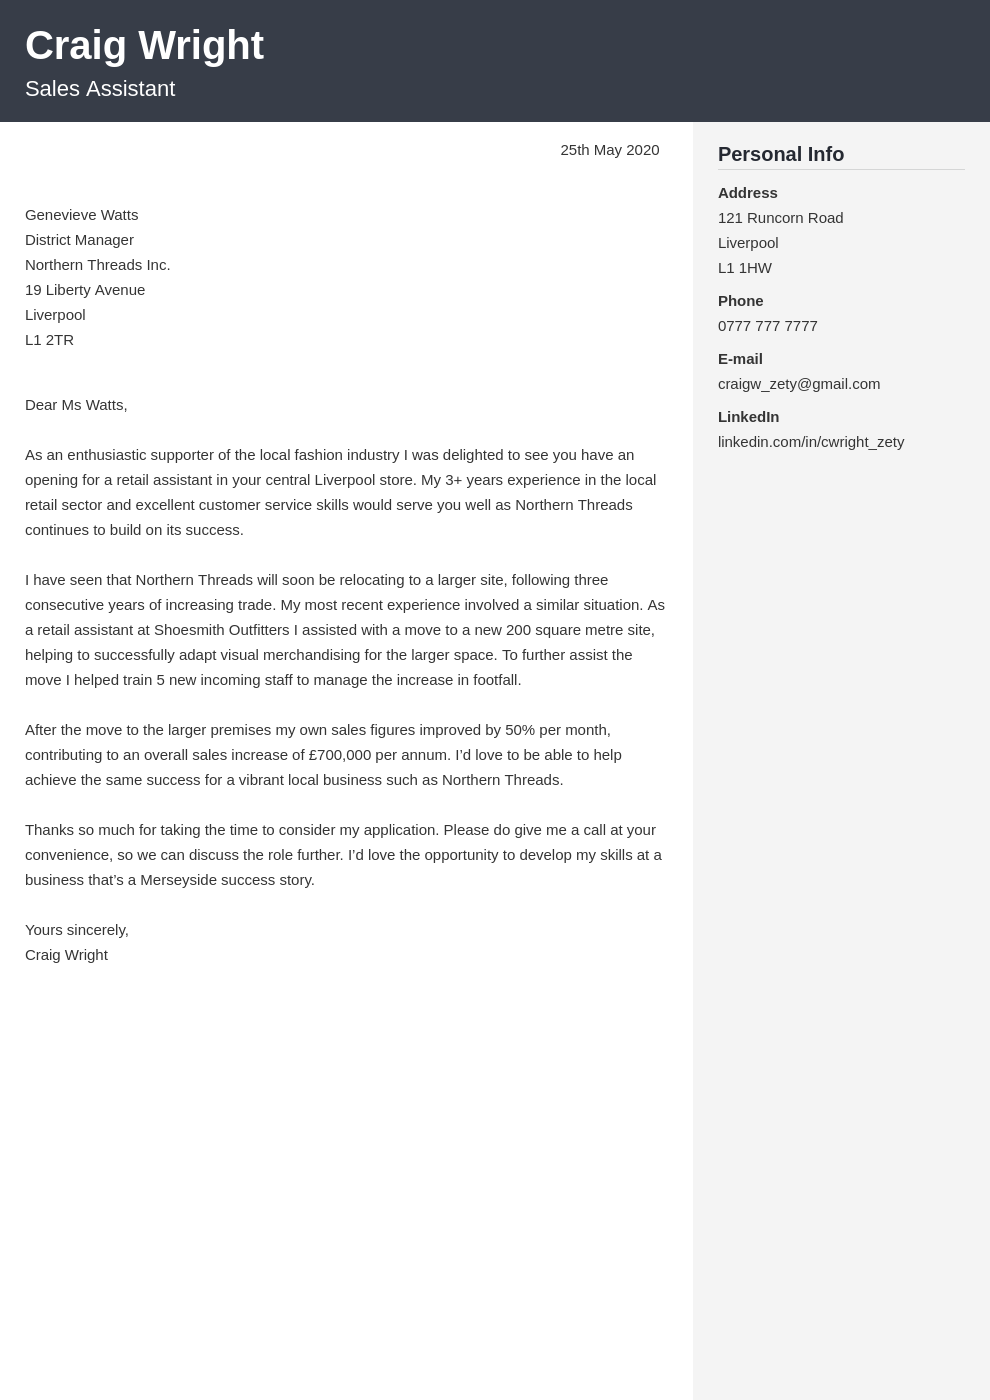 retail cover letter examples uk